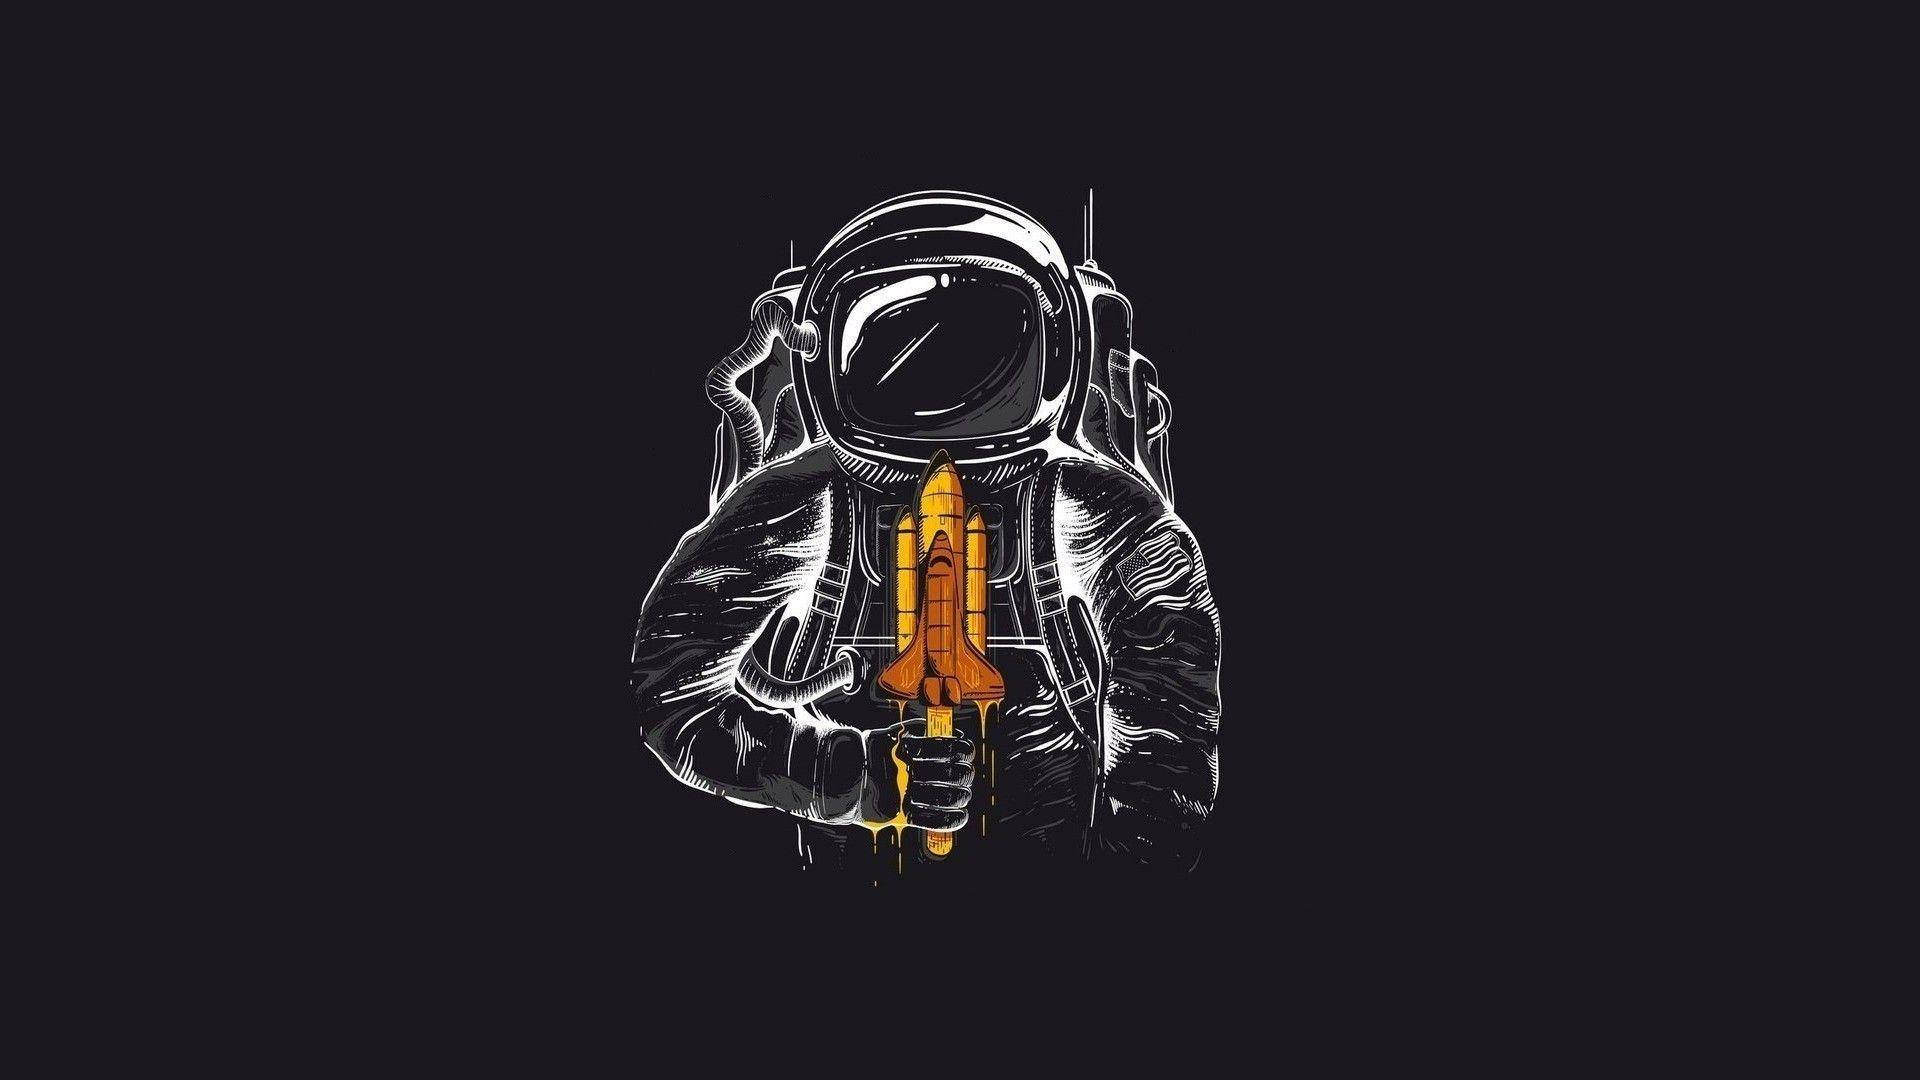 Astronaut Aesthetic With Spaceship Popicle Wallpaper